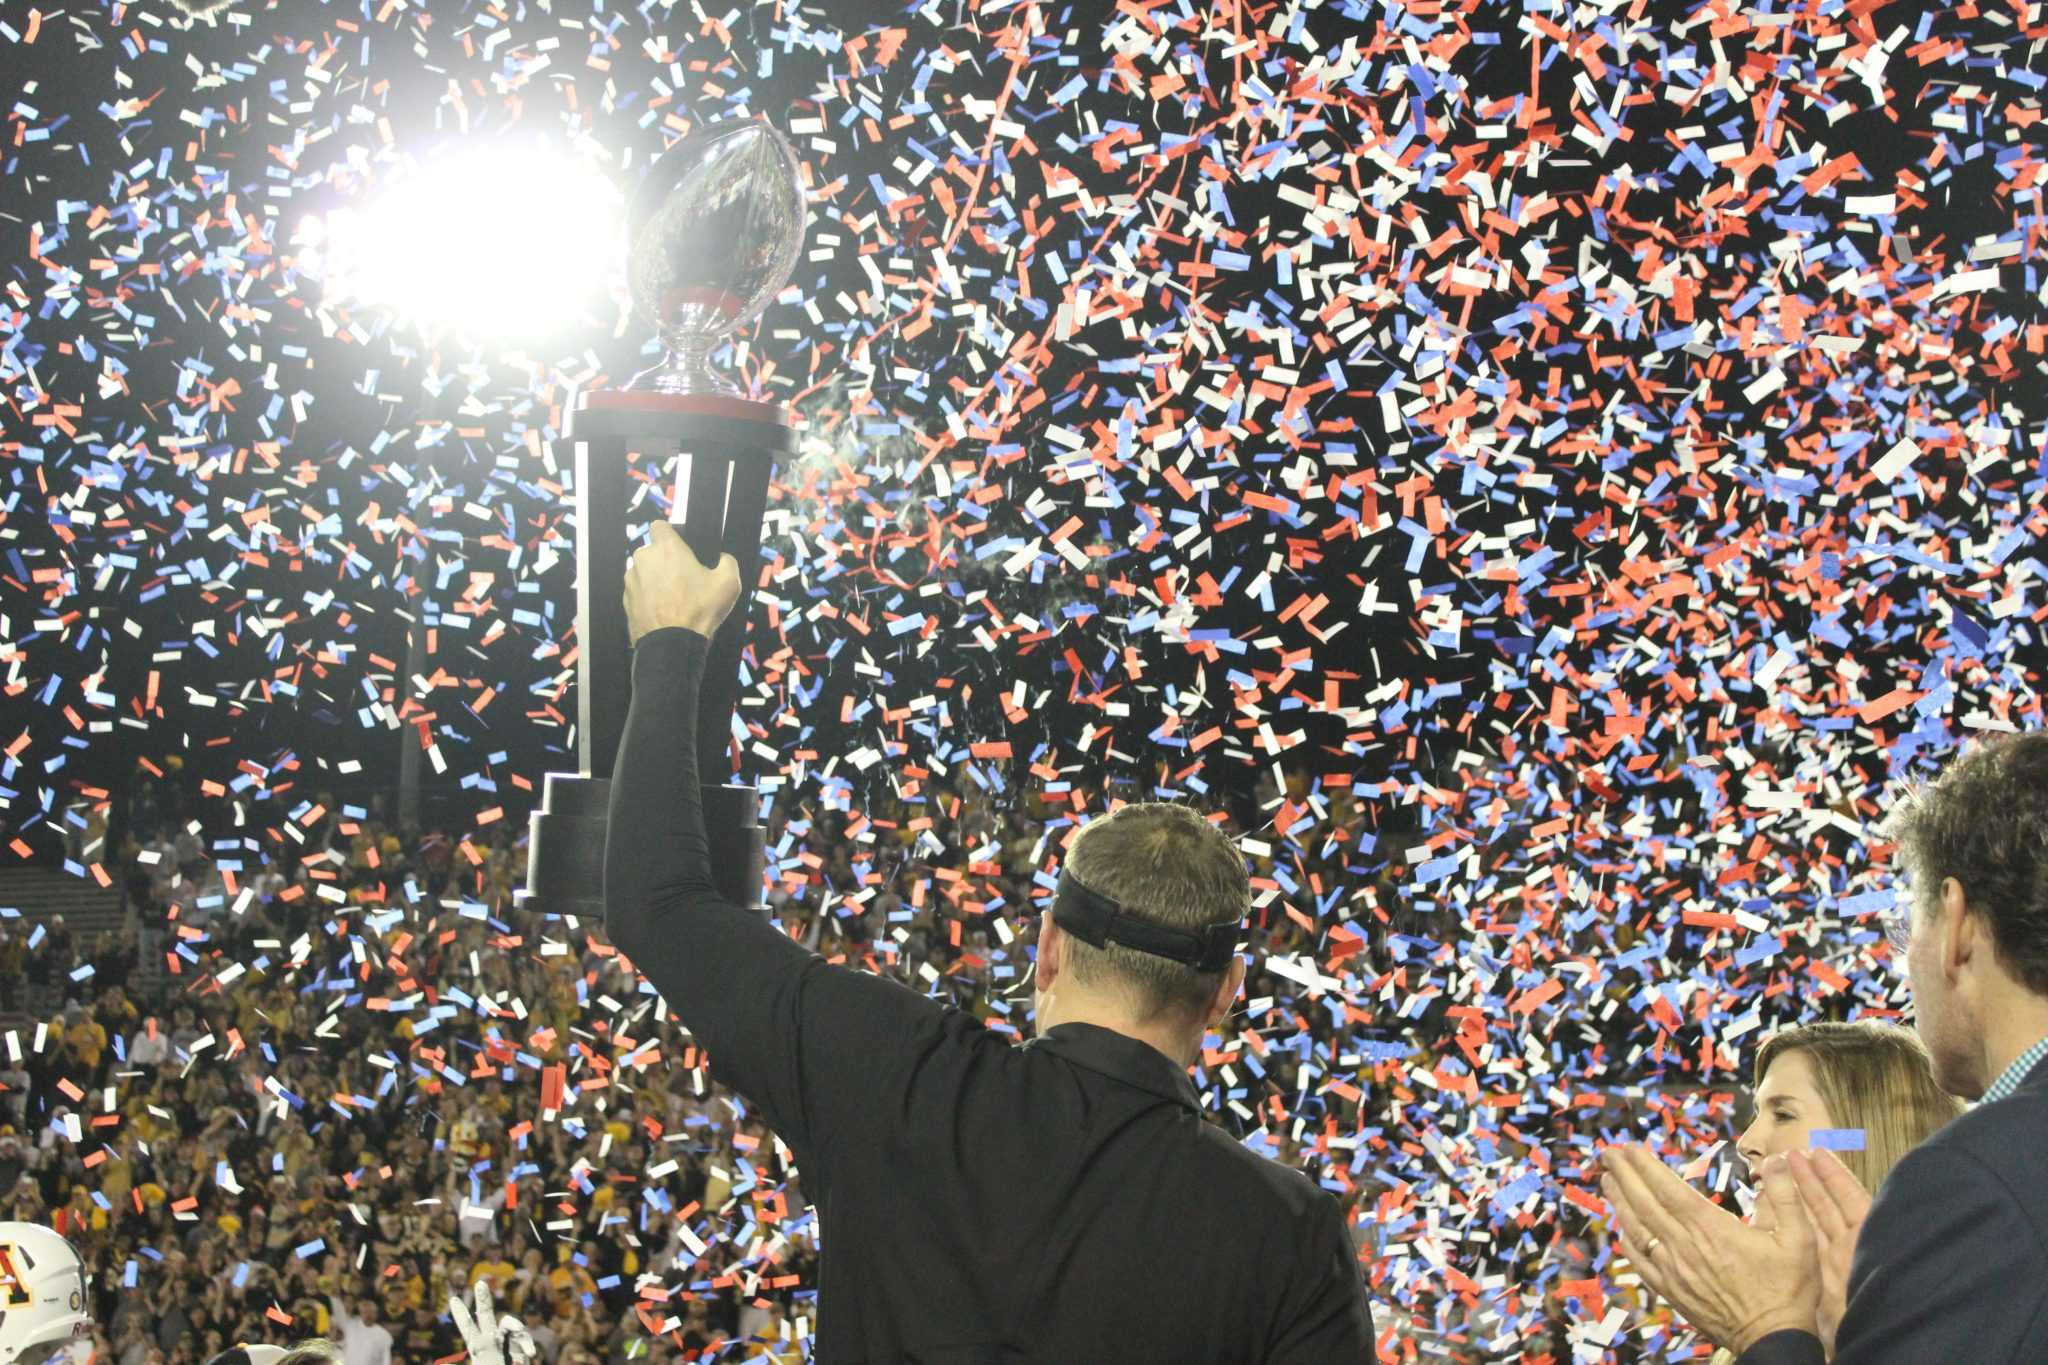 Scott Satterfield hoists the Camellia Bowl trophy for the second consecutive season.